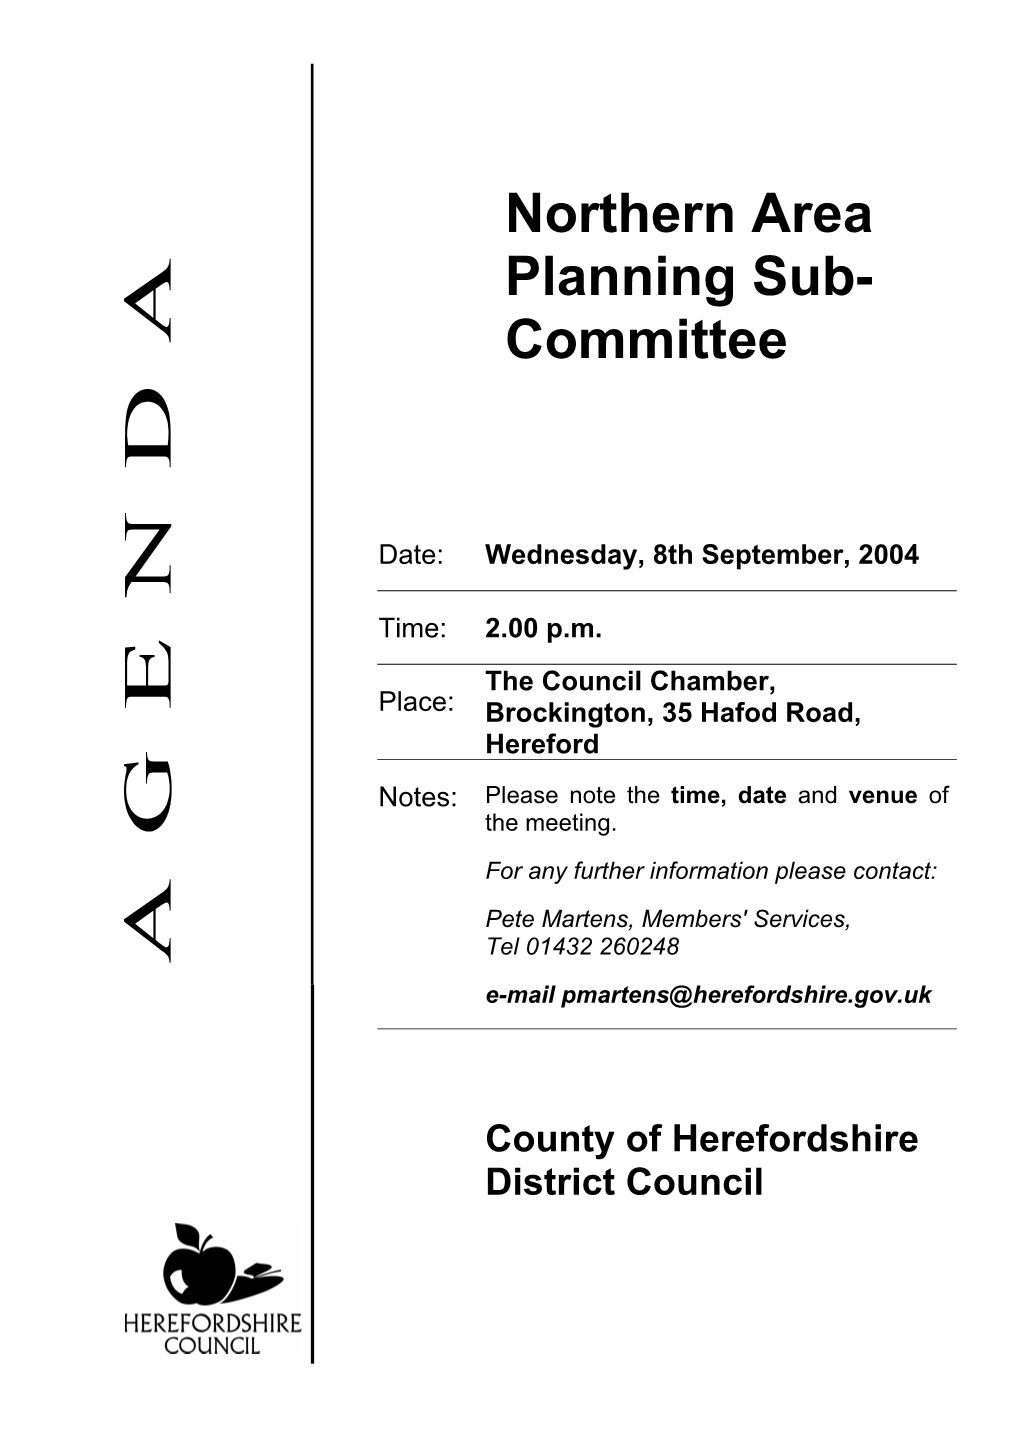 Northern Area Planning Sub- Committee Held at the Council Chamber, Brockington, 35 Hafod Road, Hereford on Wednesday, 11Th August, 2004 at 2.00 P.M